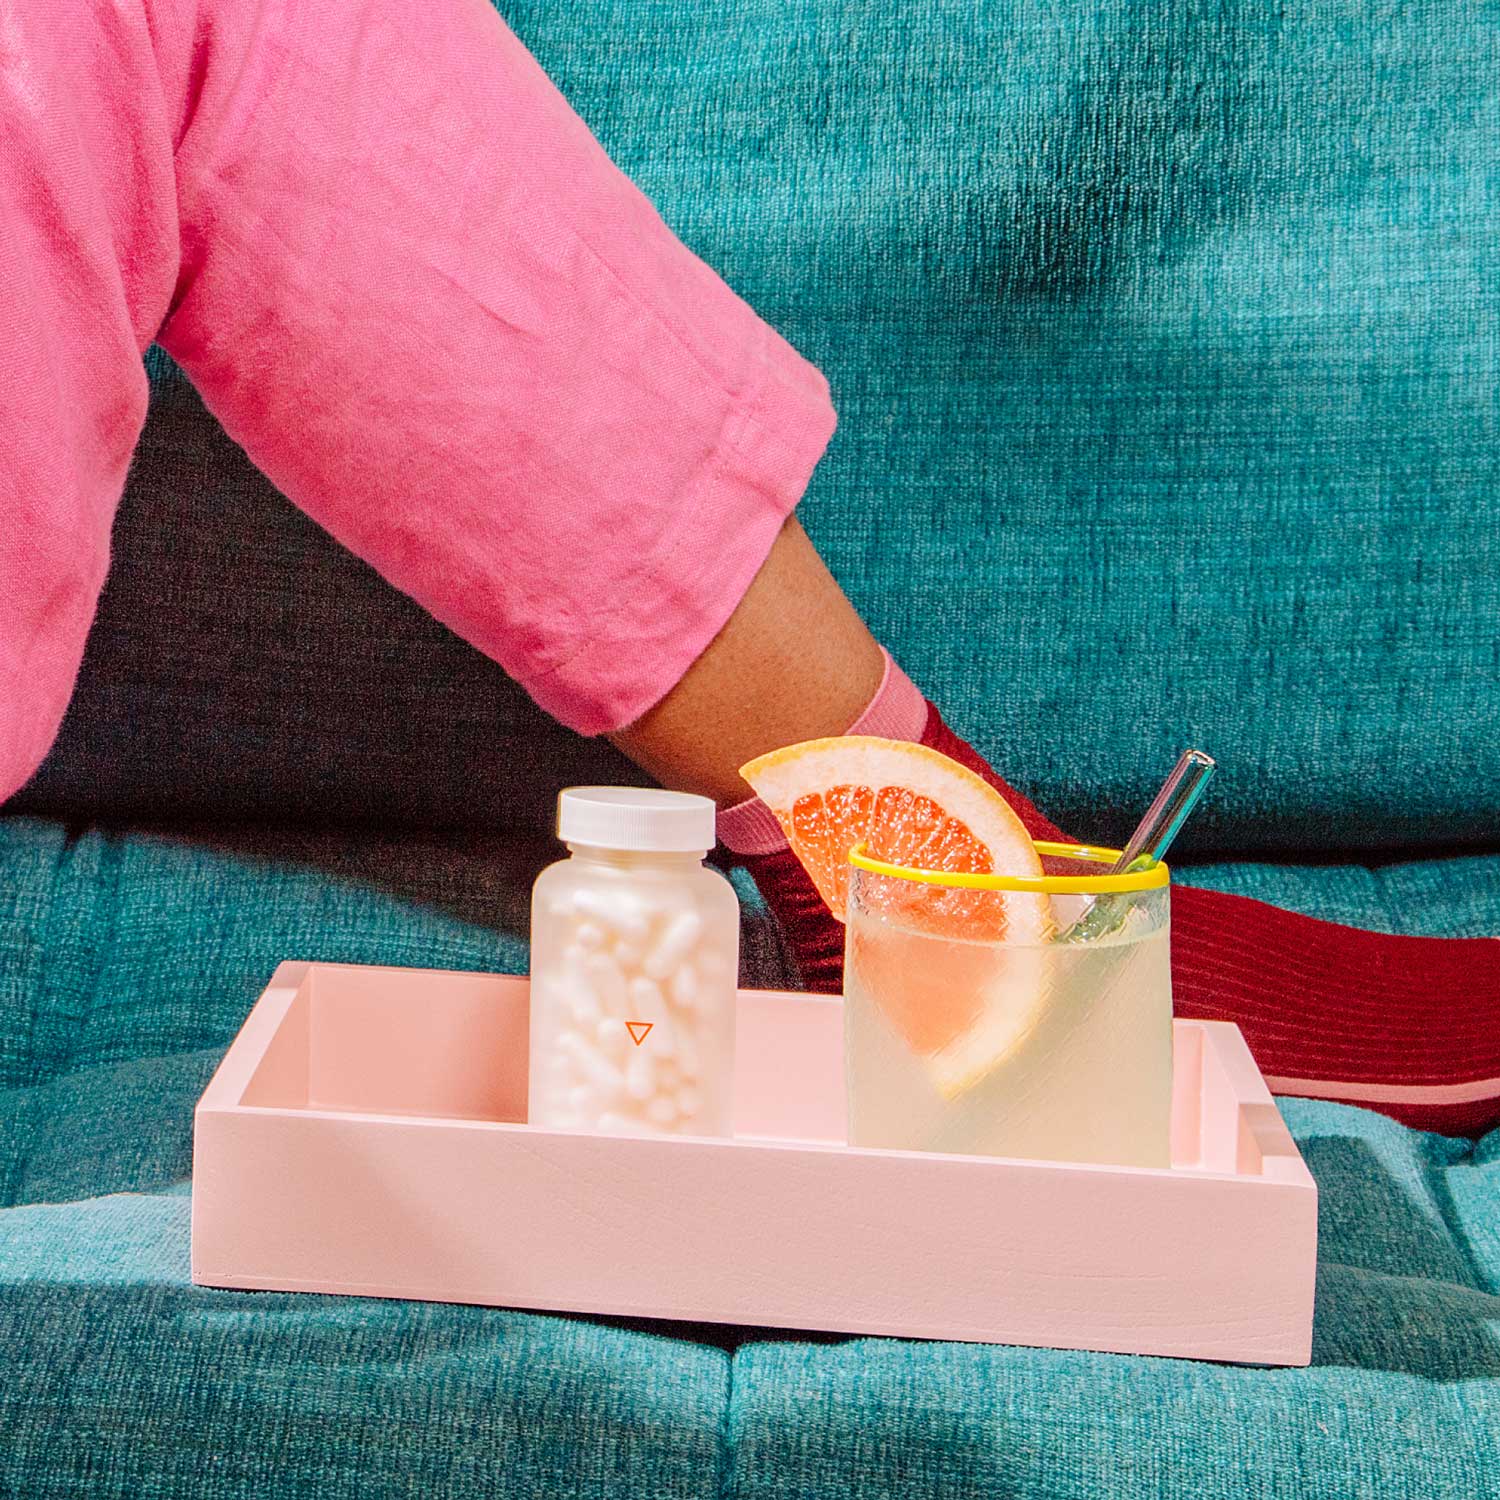 All-Natural Herpes Treatment on a pink tray with a refreshing drink on a green sofa